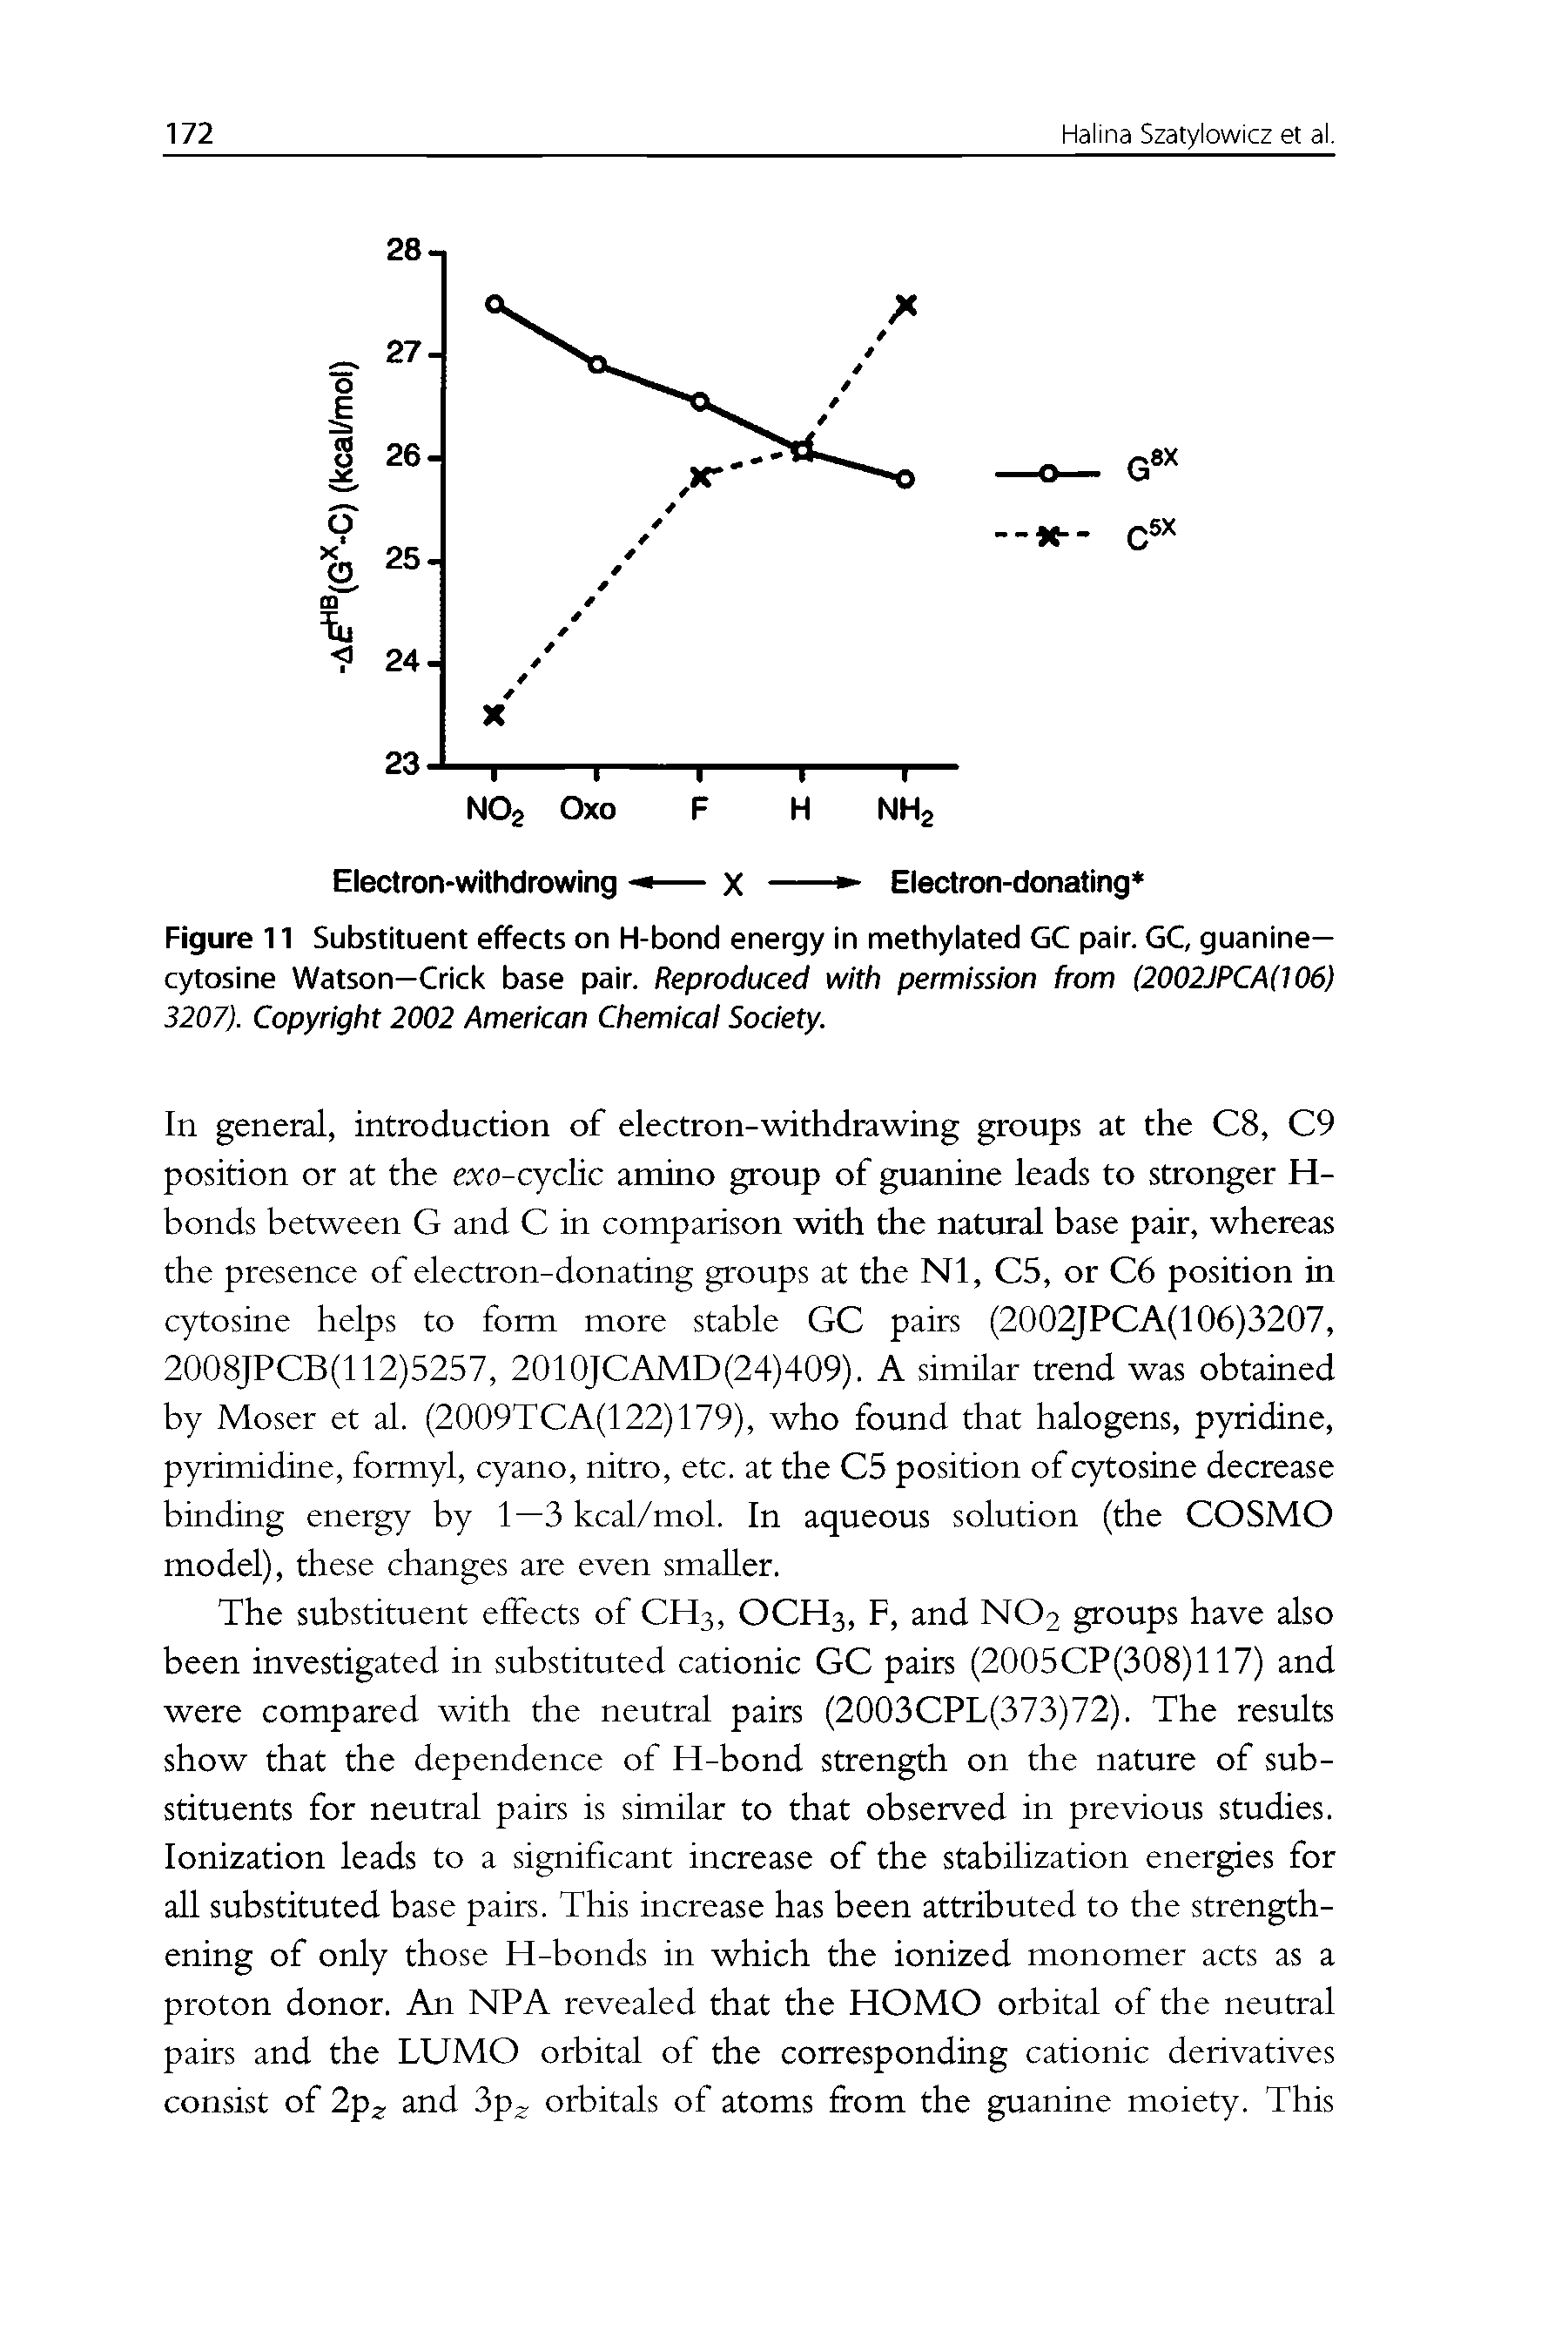 Figure 11 Substituent effects on H-bond energy in methylated GC pair. GC, guanine-cytosine Watson—Crick base pair. Reproduced with permission from (2002JPCA(106) 3207). Copyright 2002 American Chemical Society.